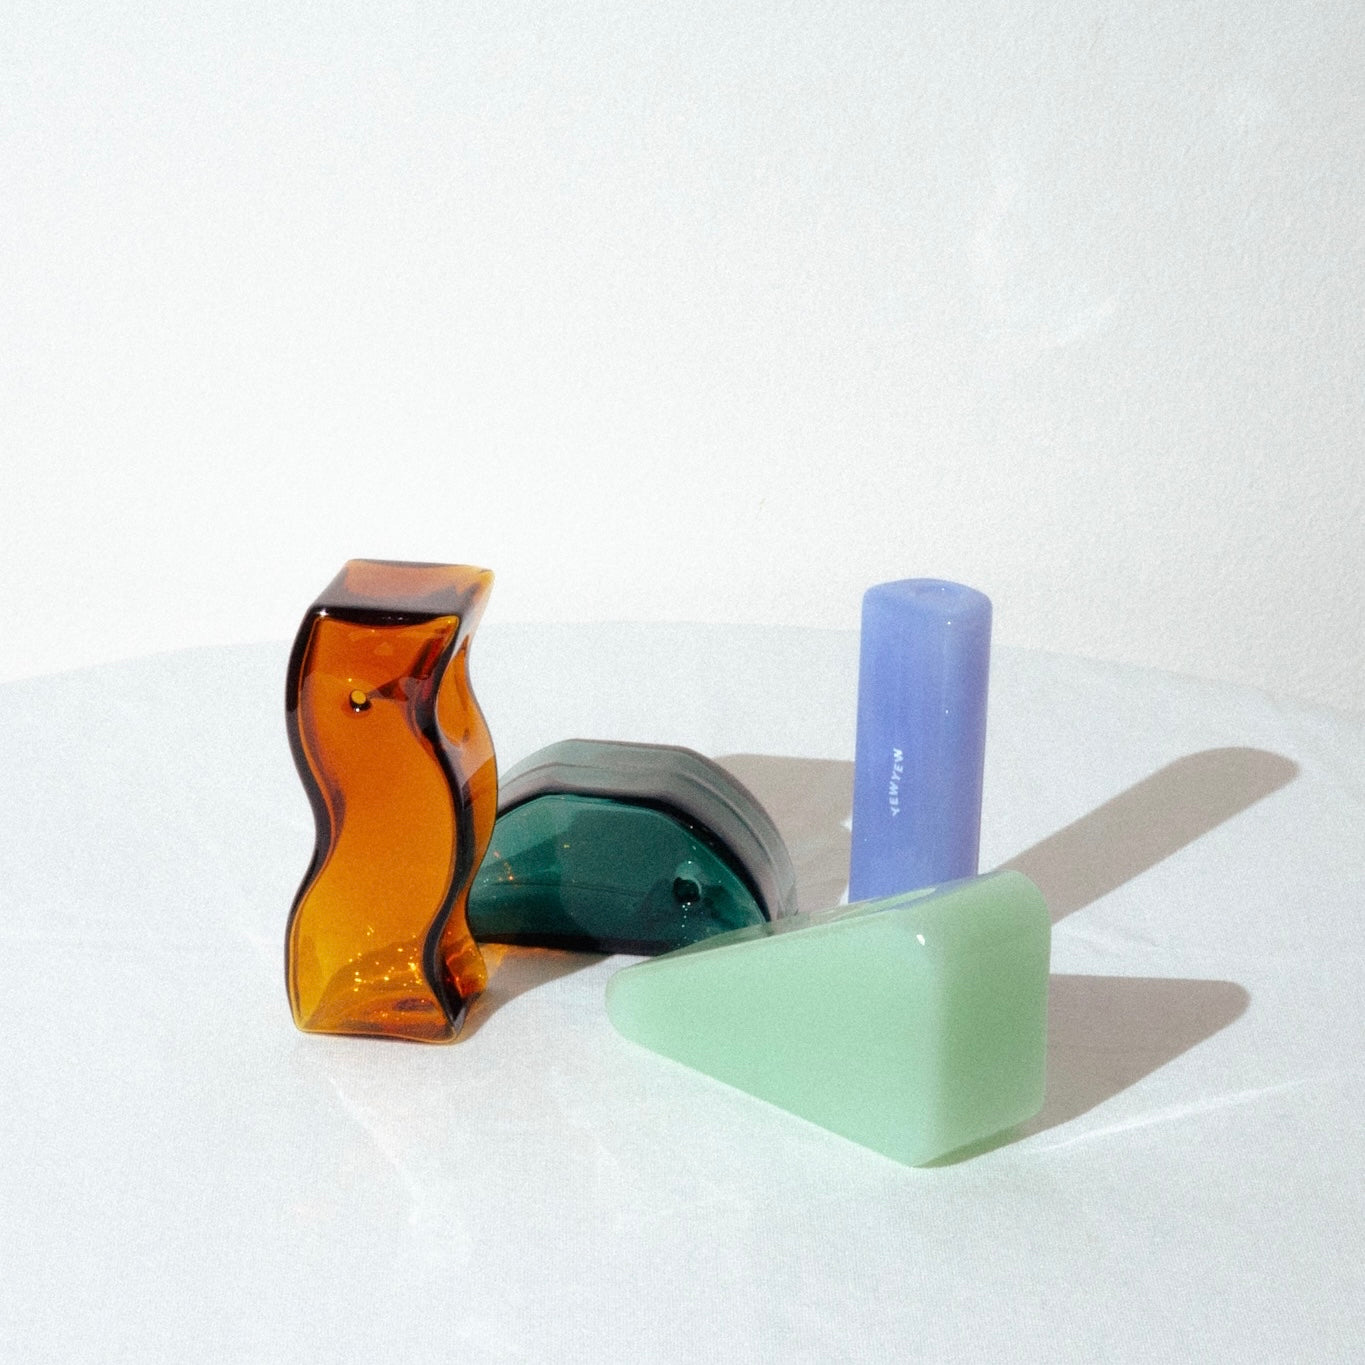 image of 4 yew yew glass pipes. a tubular solo pipe on the left in a milky blue, the amber wavy pipe, the green triangle pipe and then the teal half circle pipe. they are all in different positions against a white background.